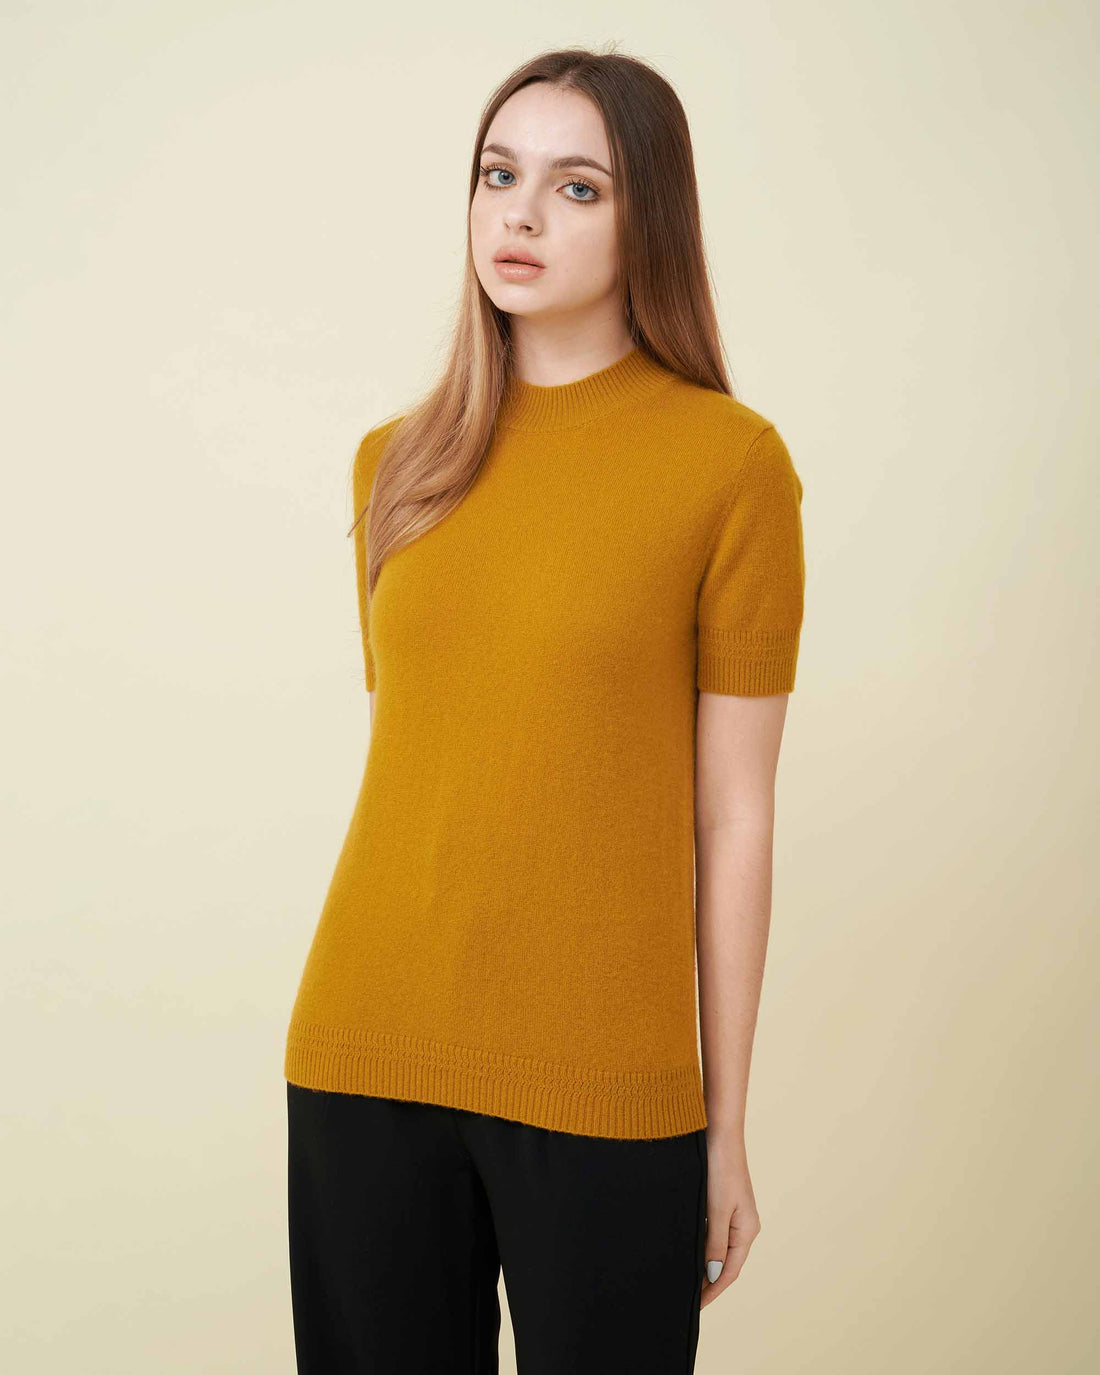 A front view of a cashmere pullover in mustard showing the length and fit